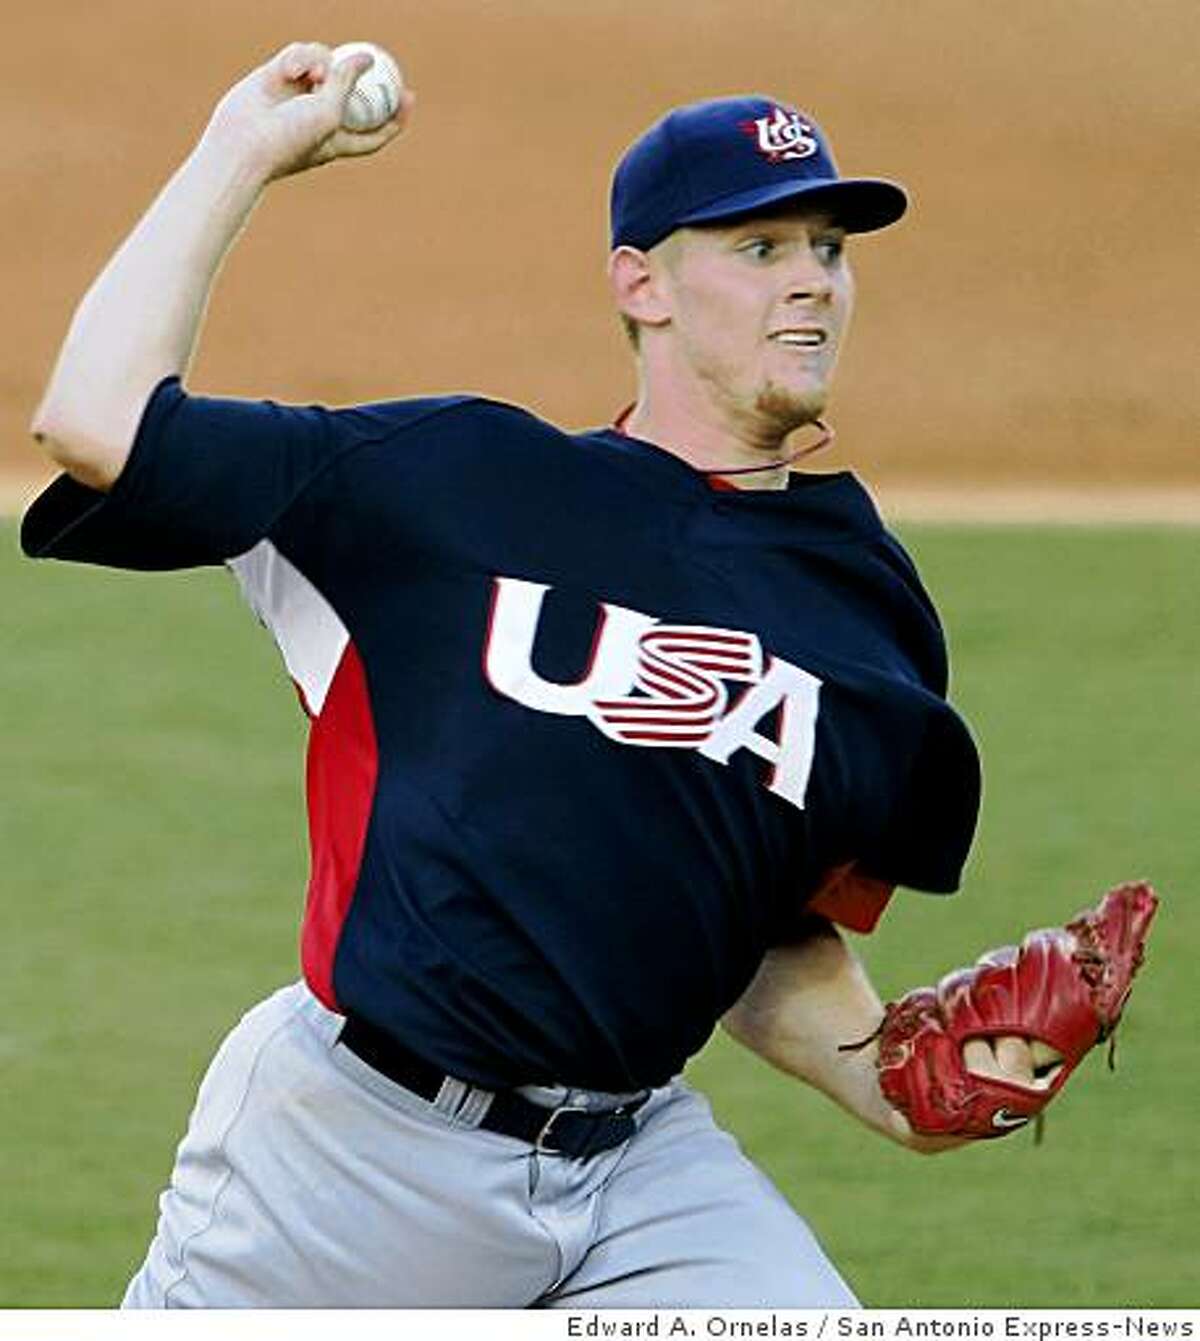 FOR SPORTS - USA's Stephen Strasburg pitches against Cuba during a semifinal game at the 2008 Beijing Olympics Friday Aug 22, 2008 in Beijing, China. Cuba won 10-2. (PHOTO BY EDWARD A. ORNELAS/eornelas@express-news.net)